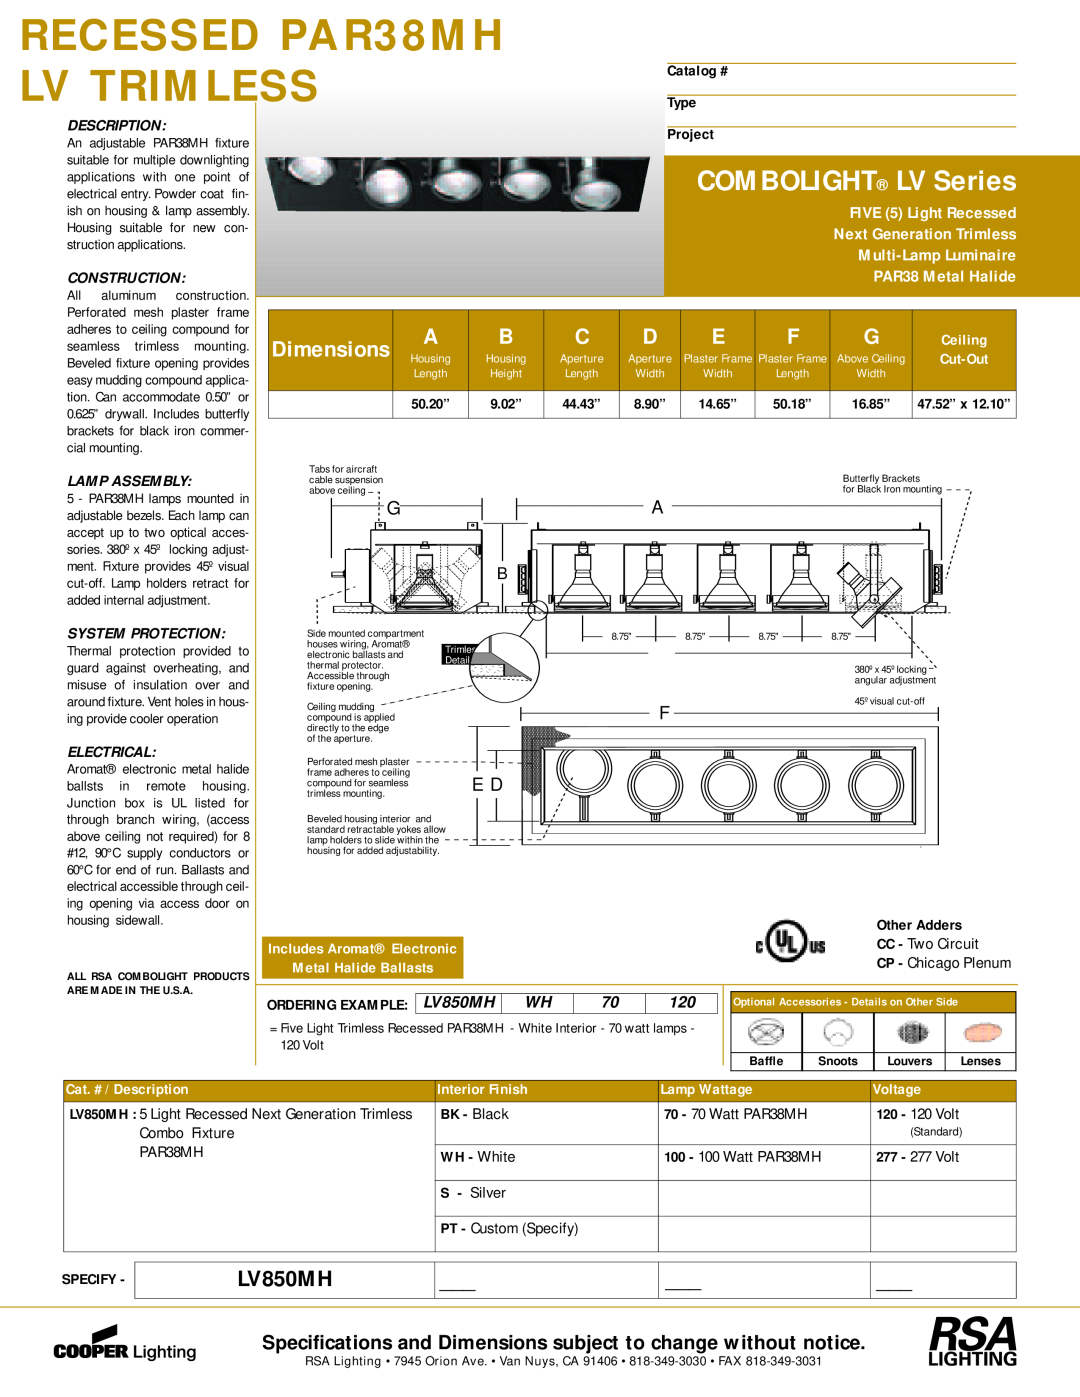 Cooper Lighting LV850MH dimensions RECESSED PAR38MH, Lv Trimless, COMBOLIGHT LV Series, Dimensions, FIVE 5 Light Recessed 